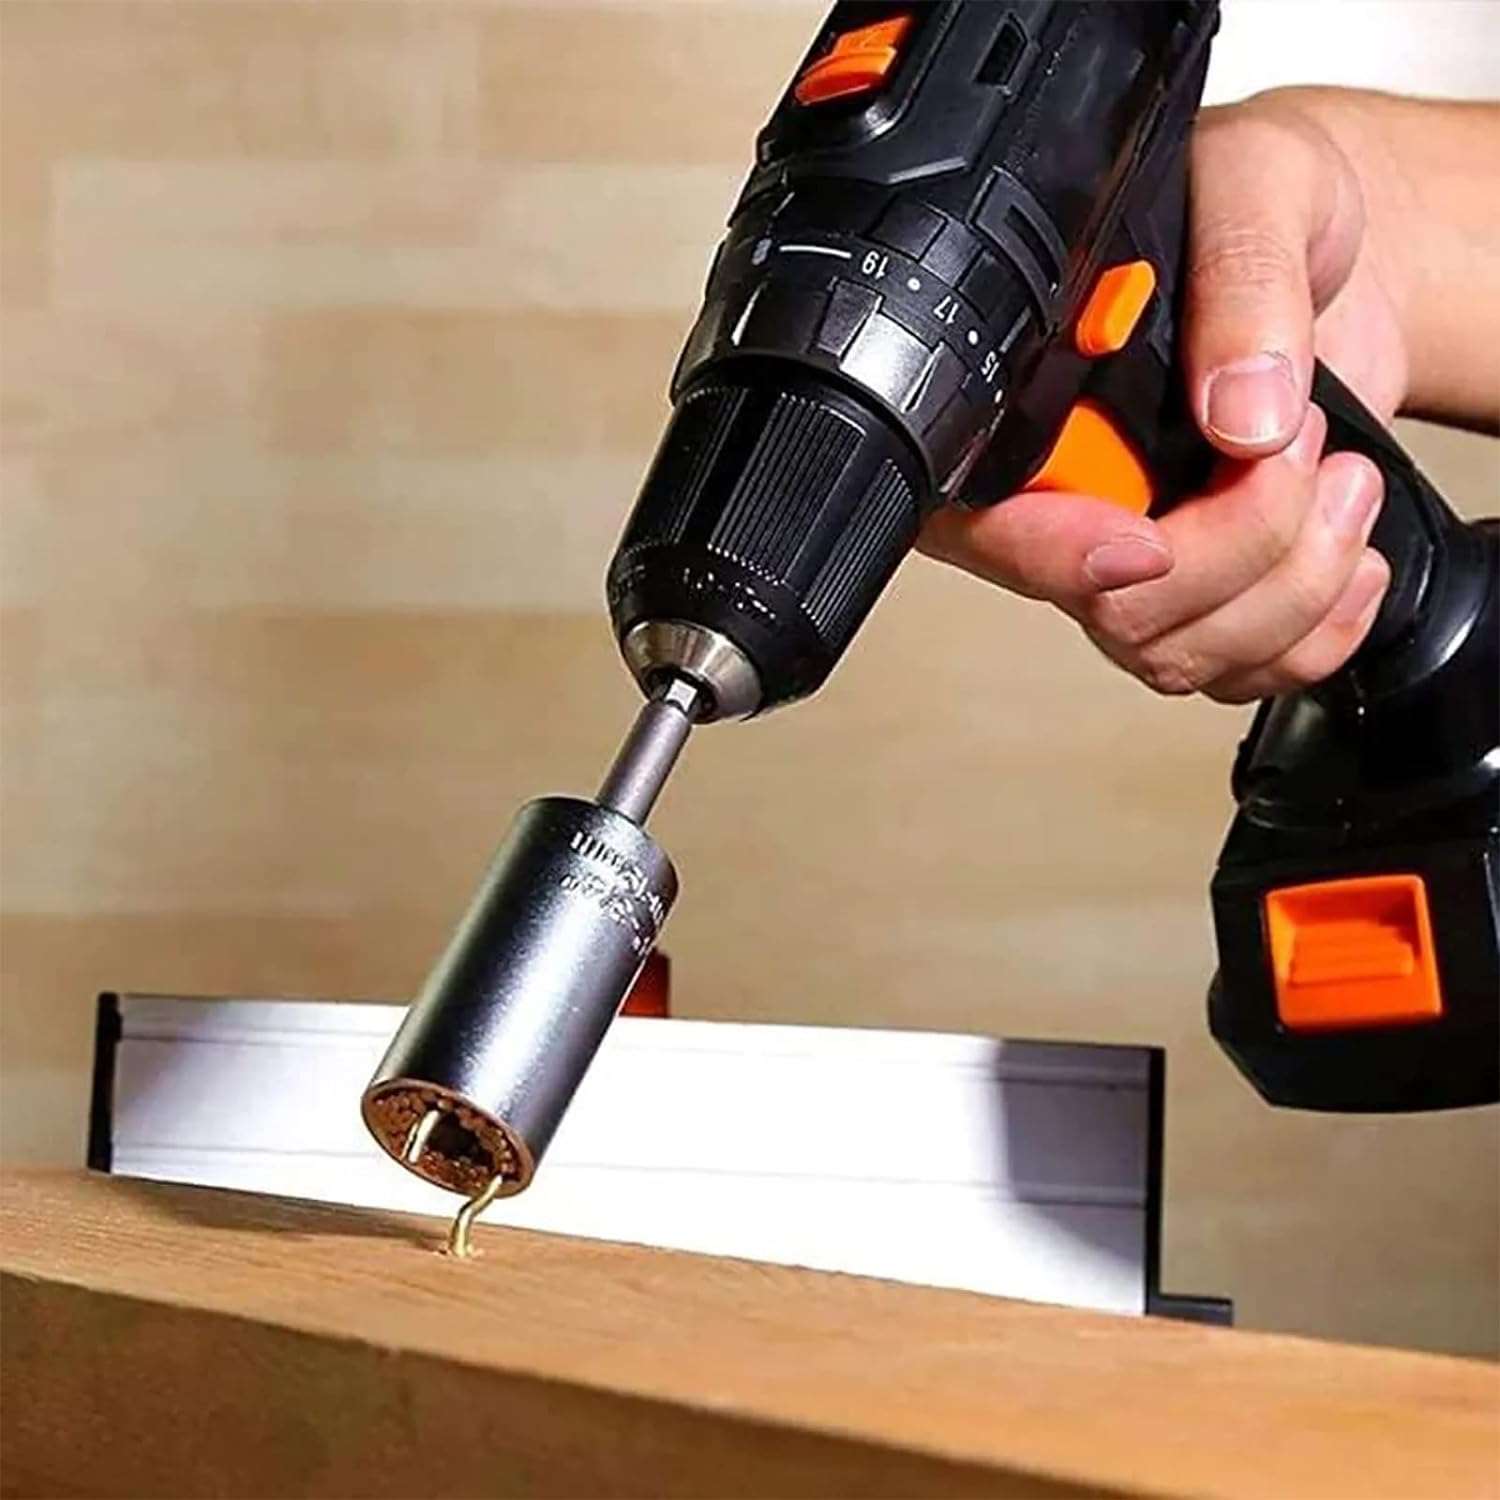 Adapter Lets You Plug In Cordless Power Tools